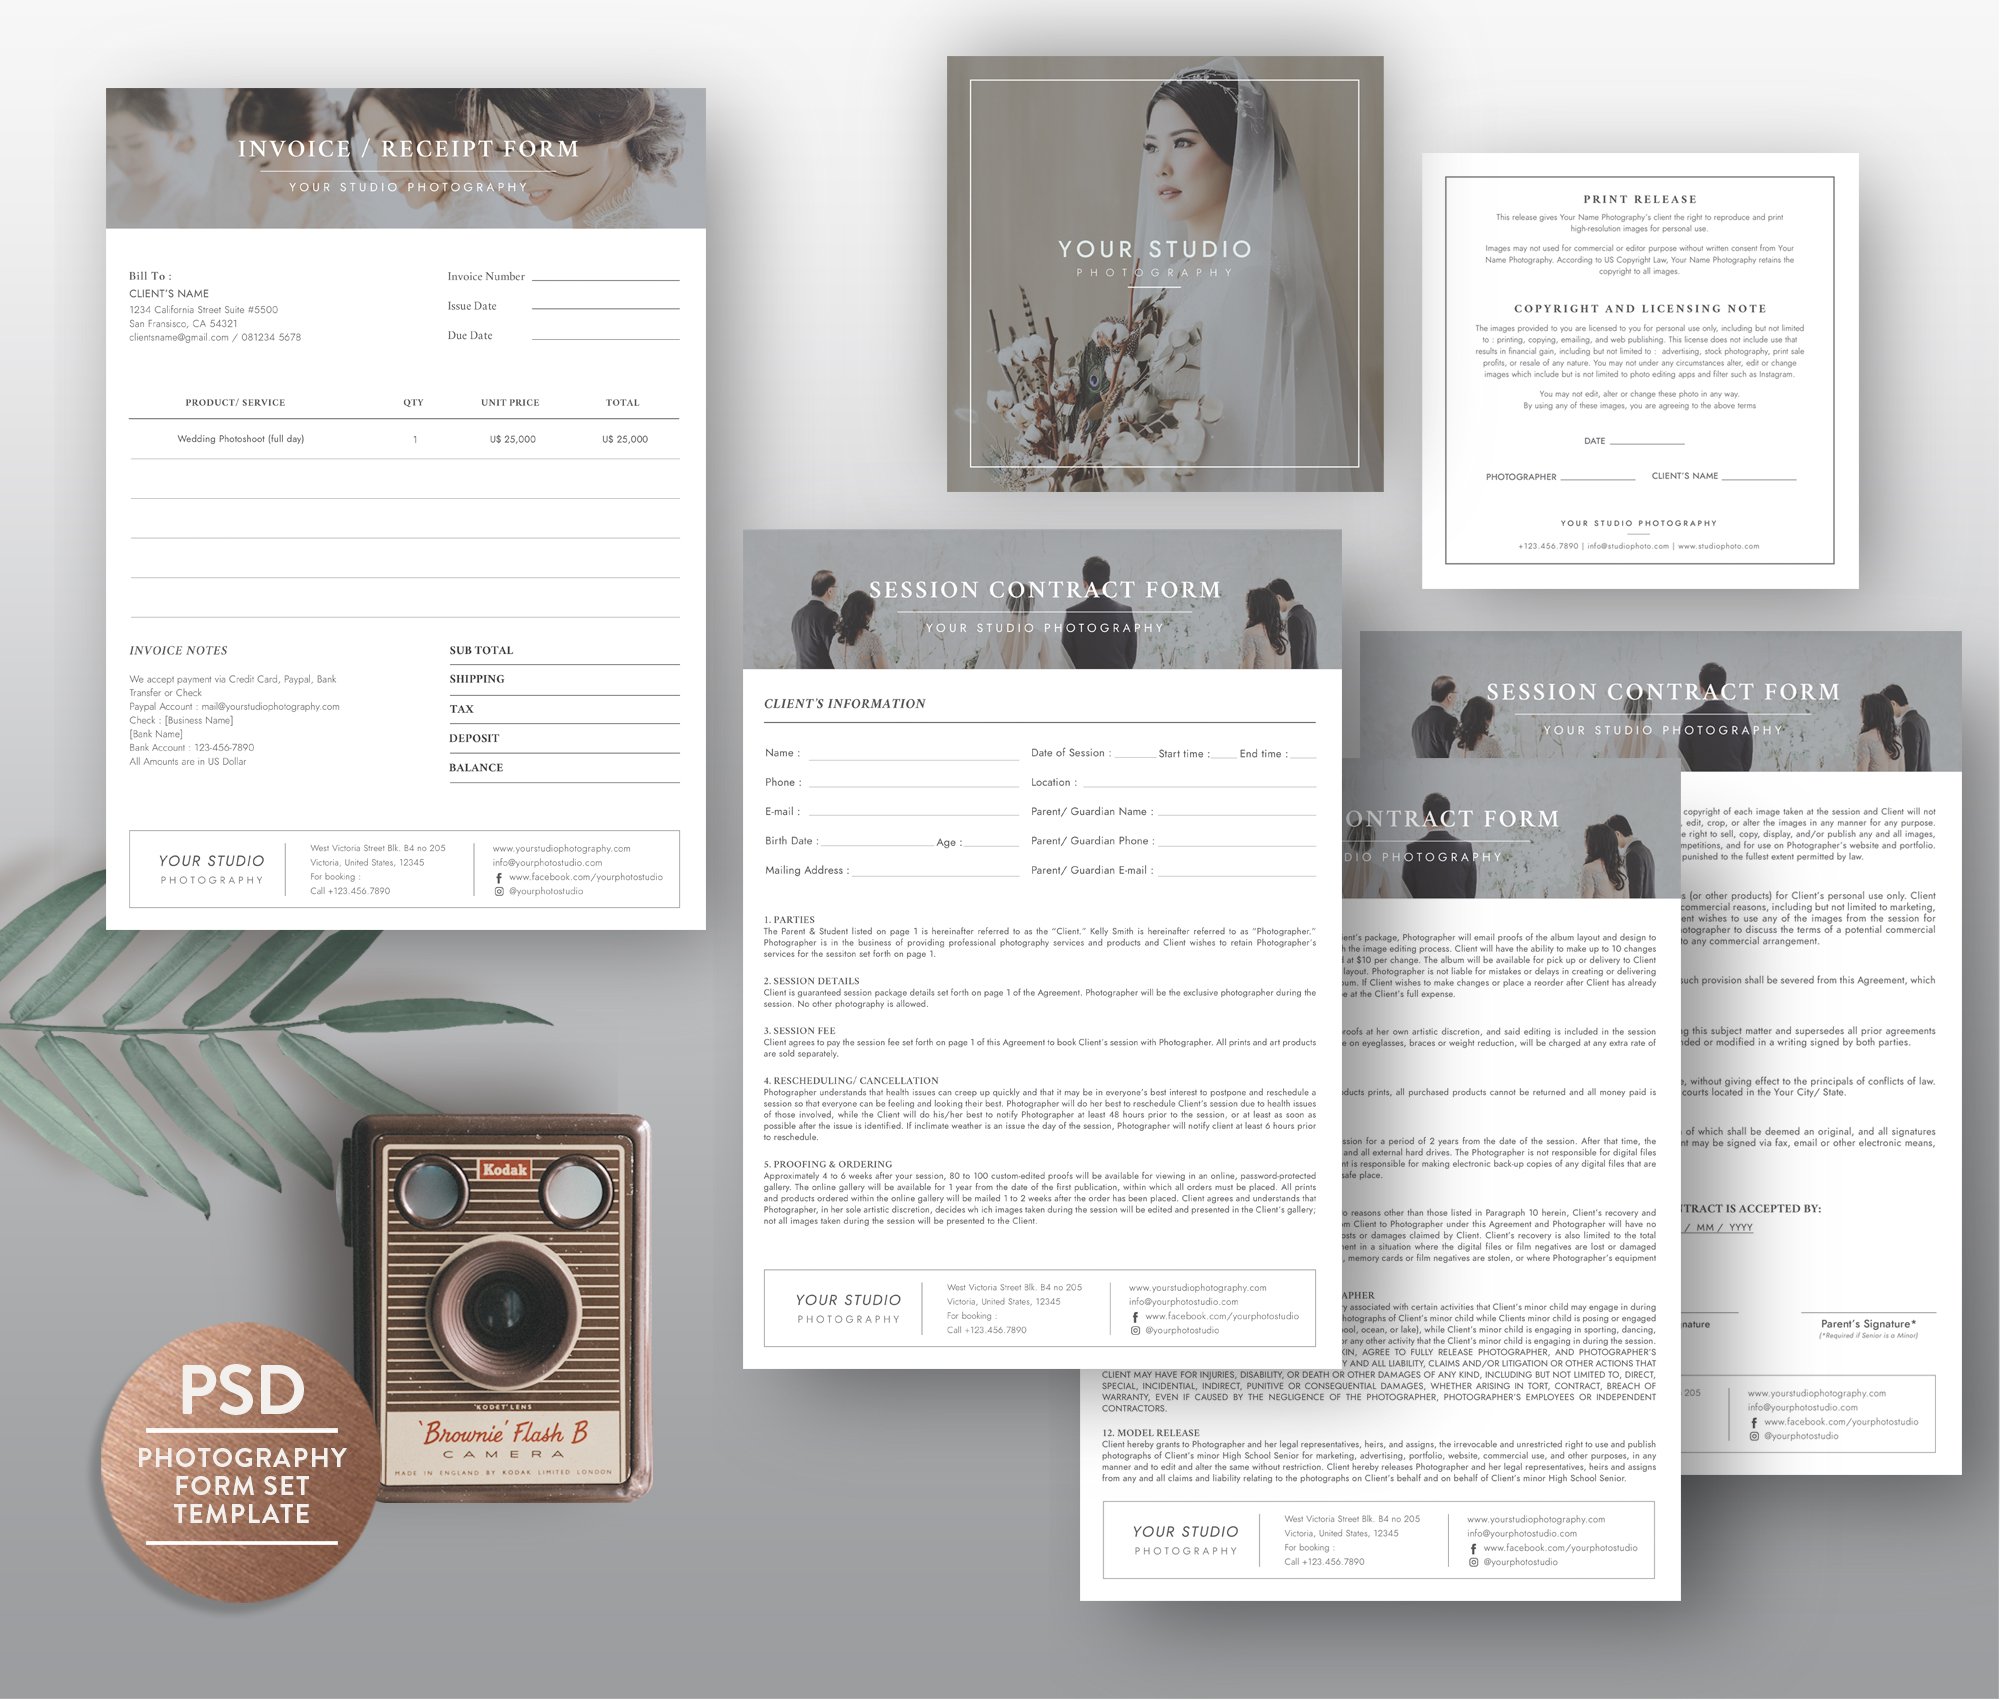 Bundles of Photography Business Form preview image.